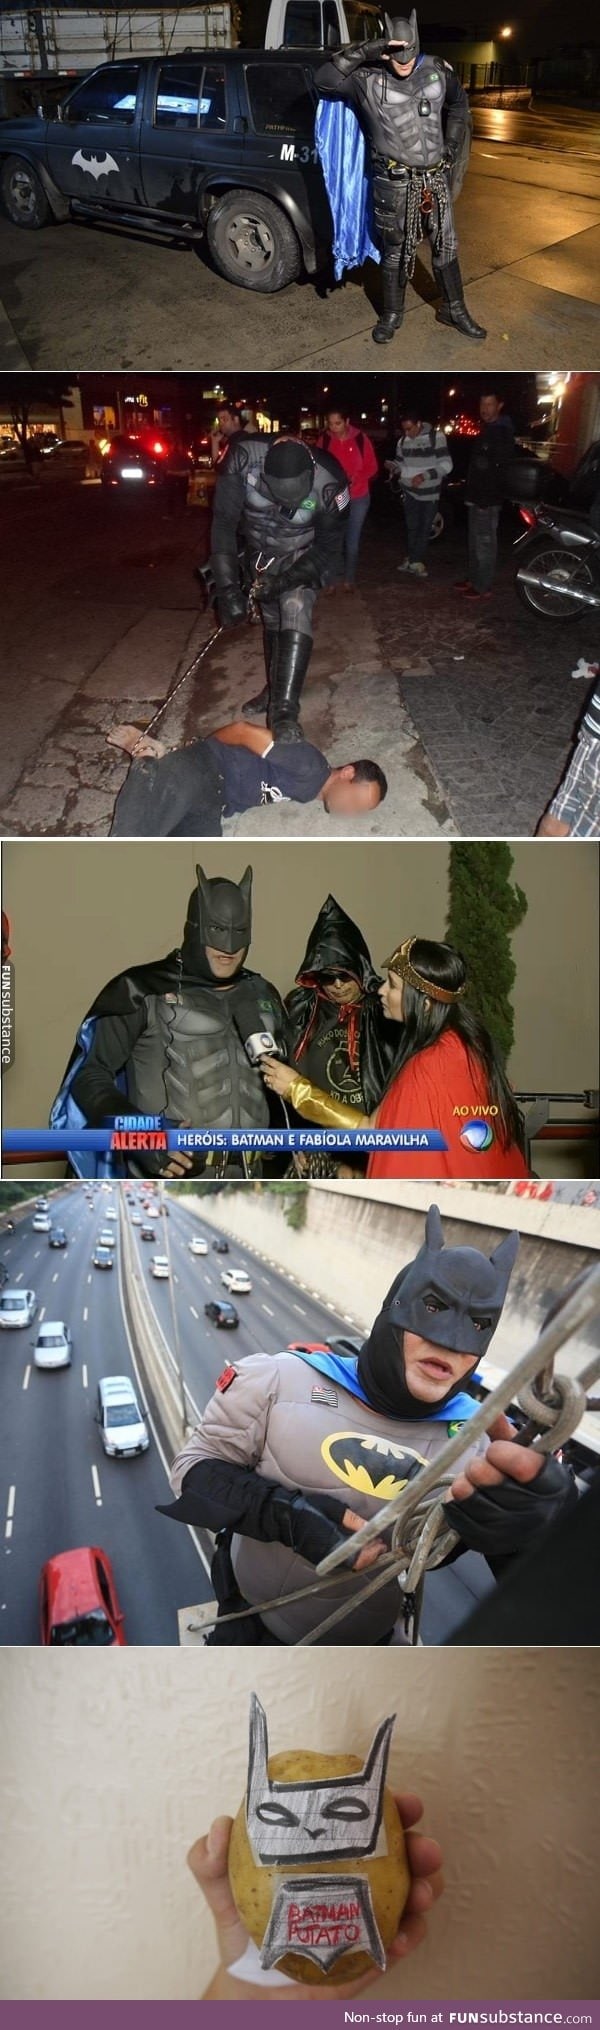 A retired police officer who fights crime during the night by himself is a real Batman